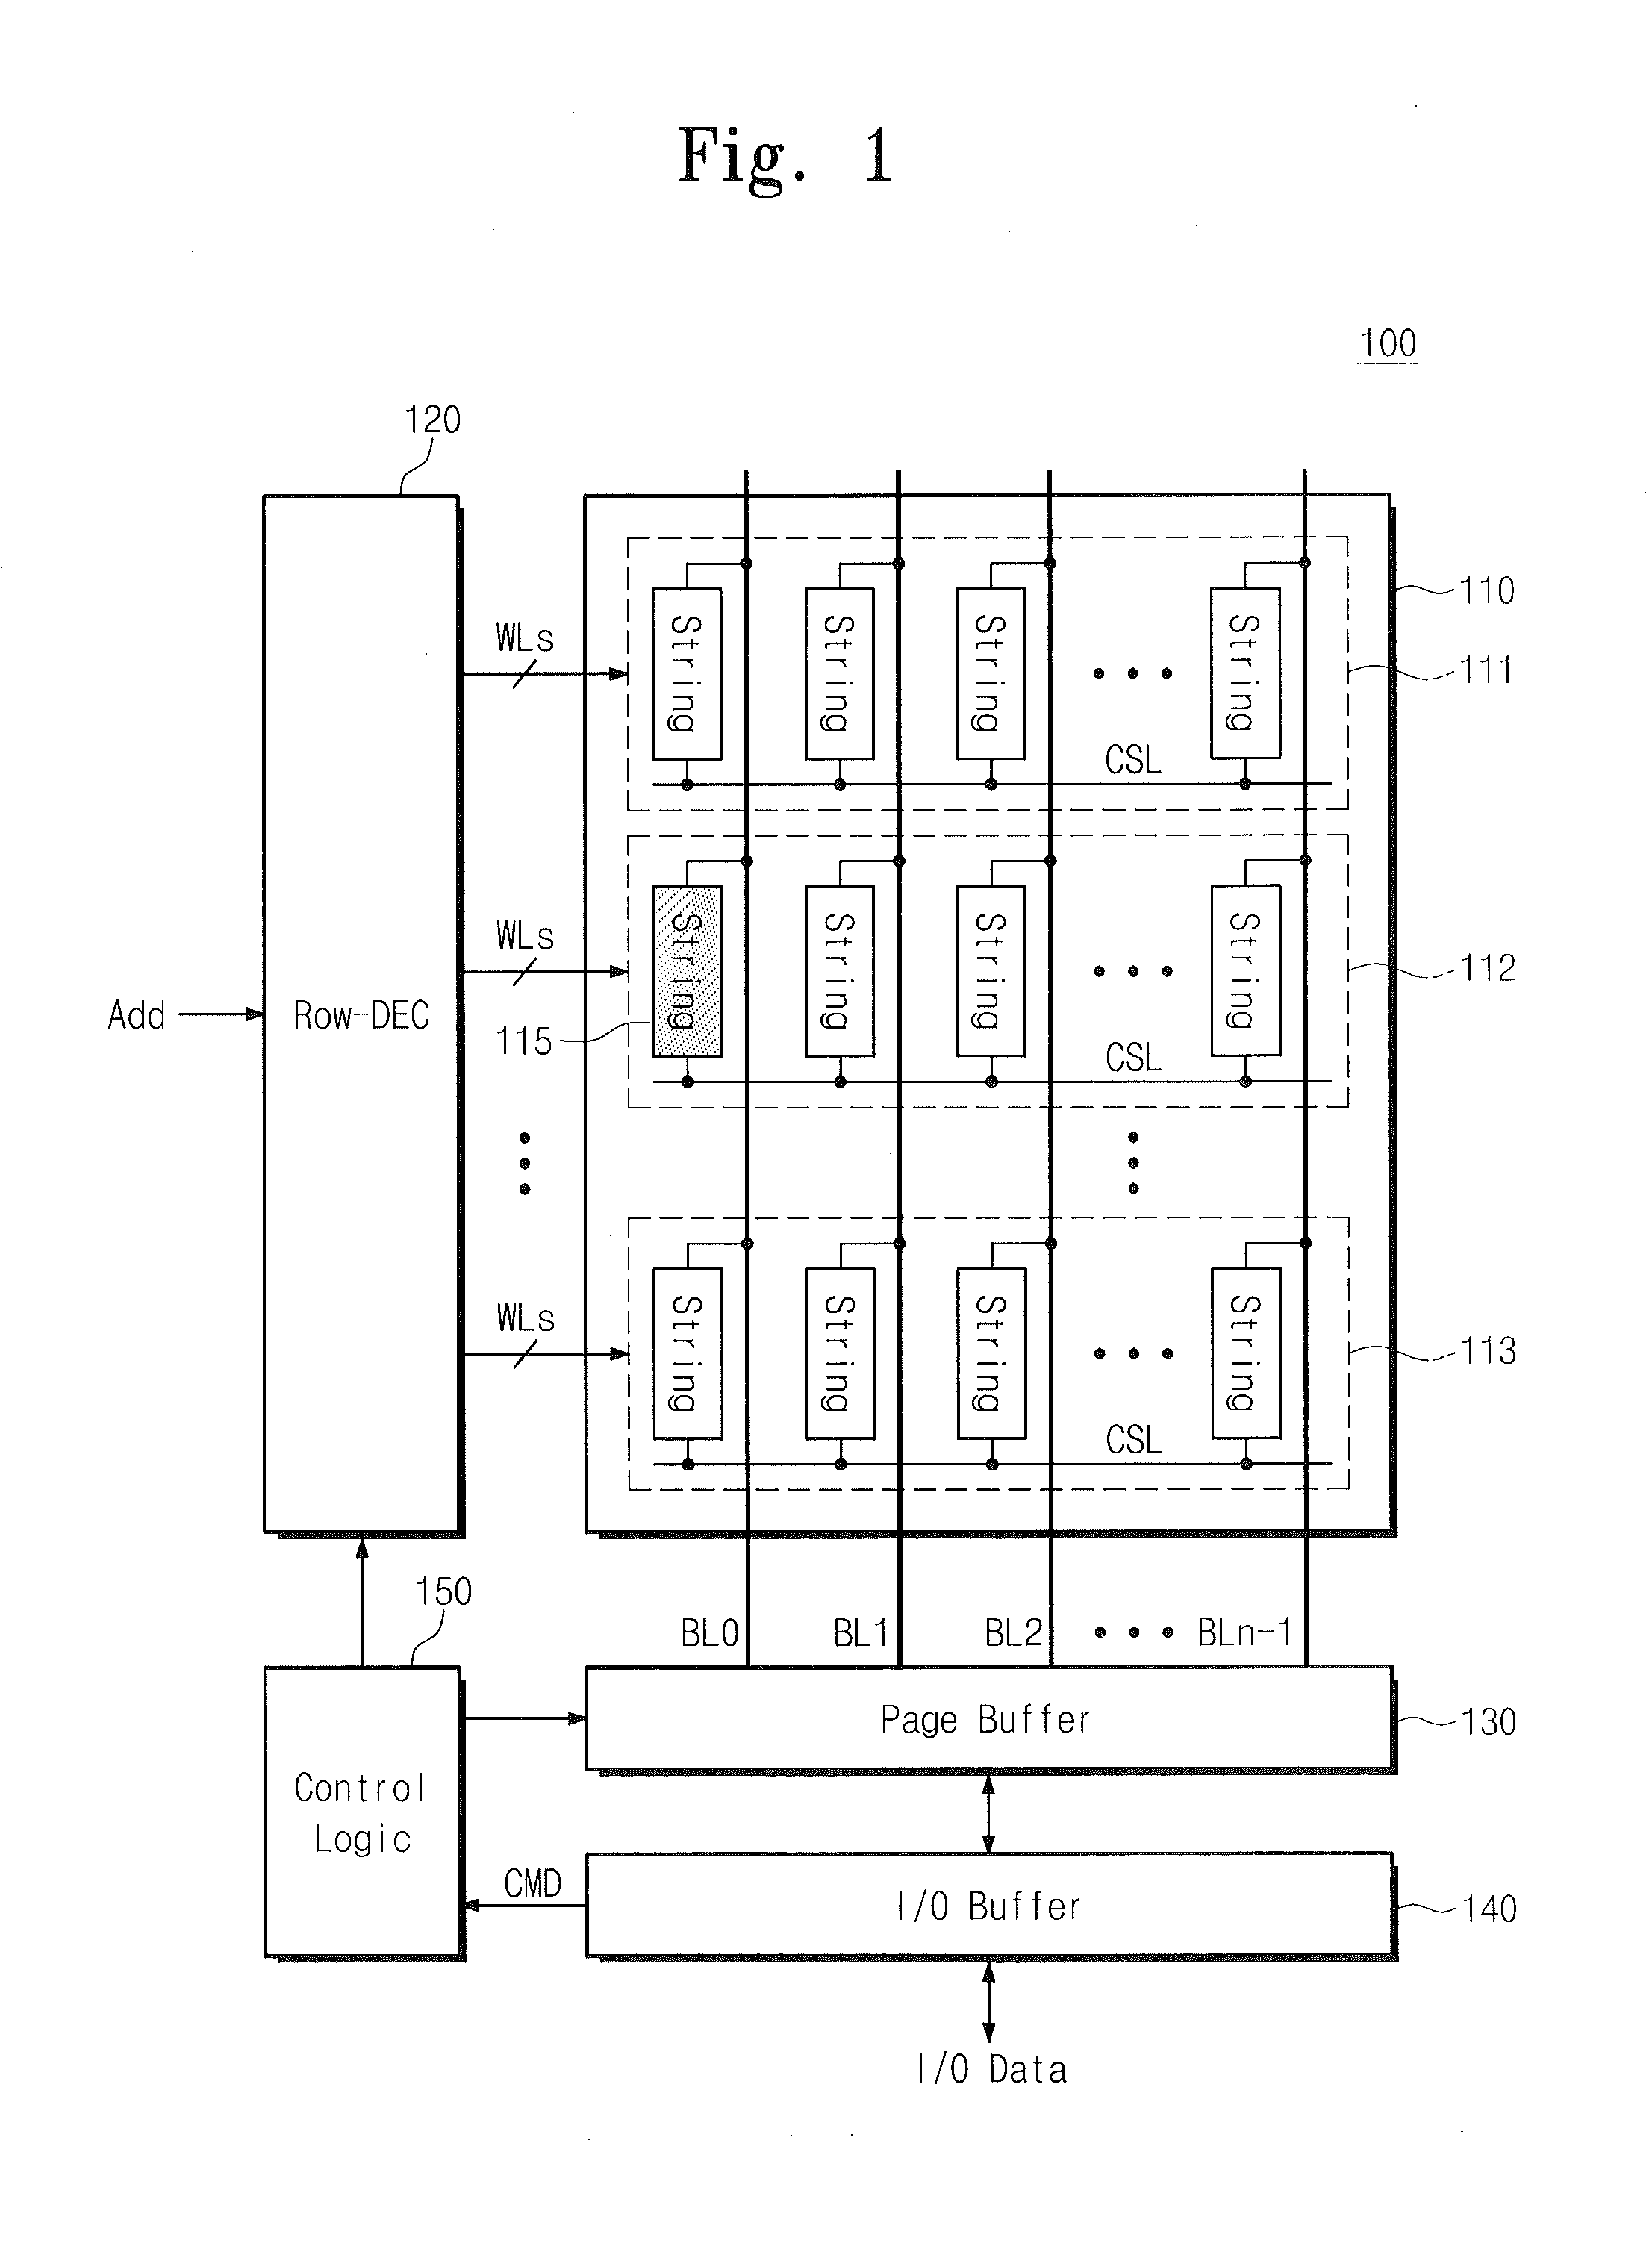 Methods of Performing Error Detection/Correction in Nonvolatile Memory Devices